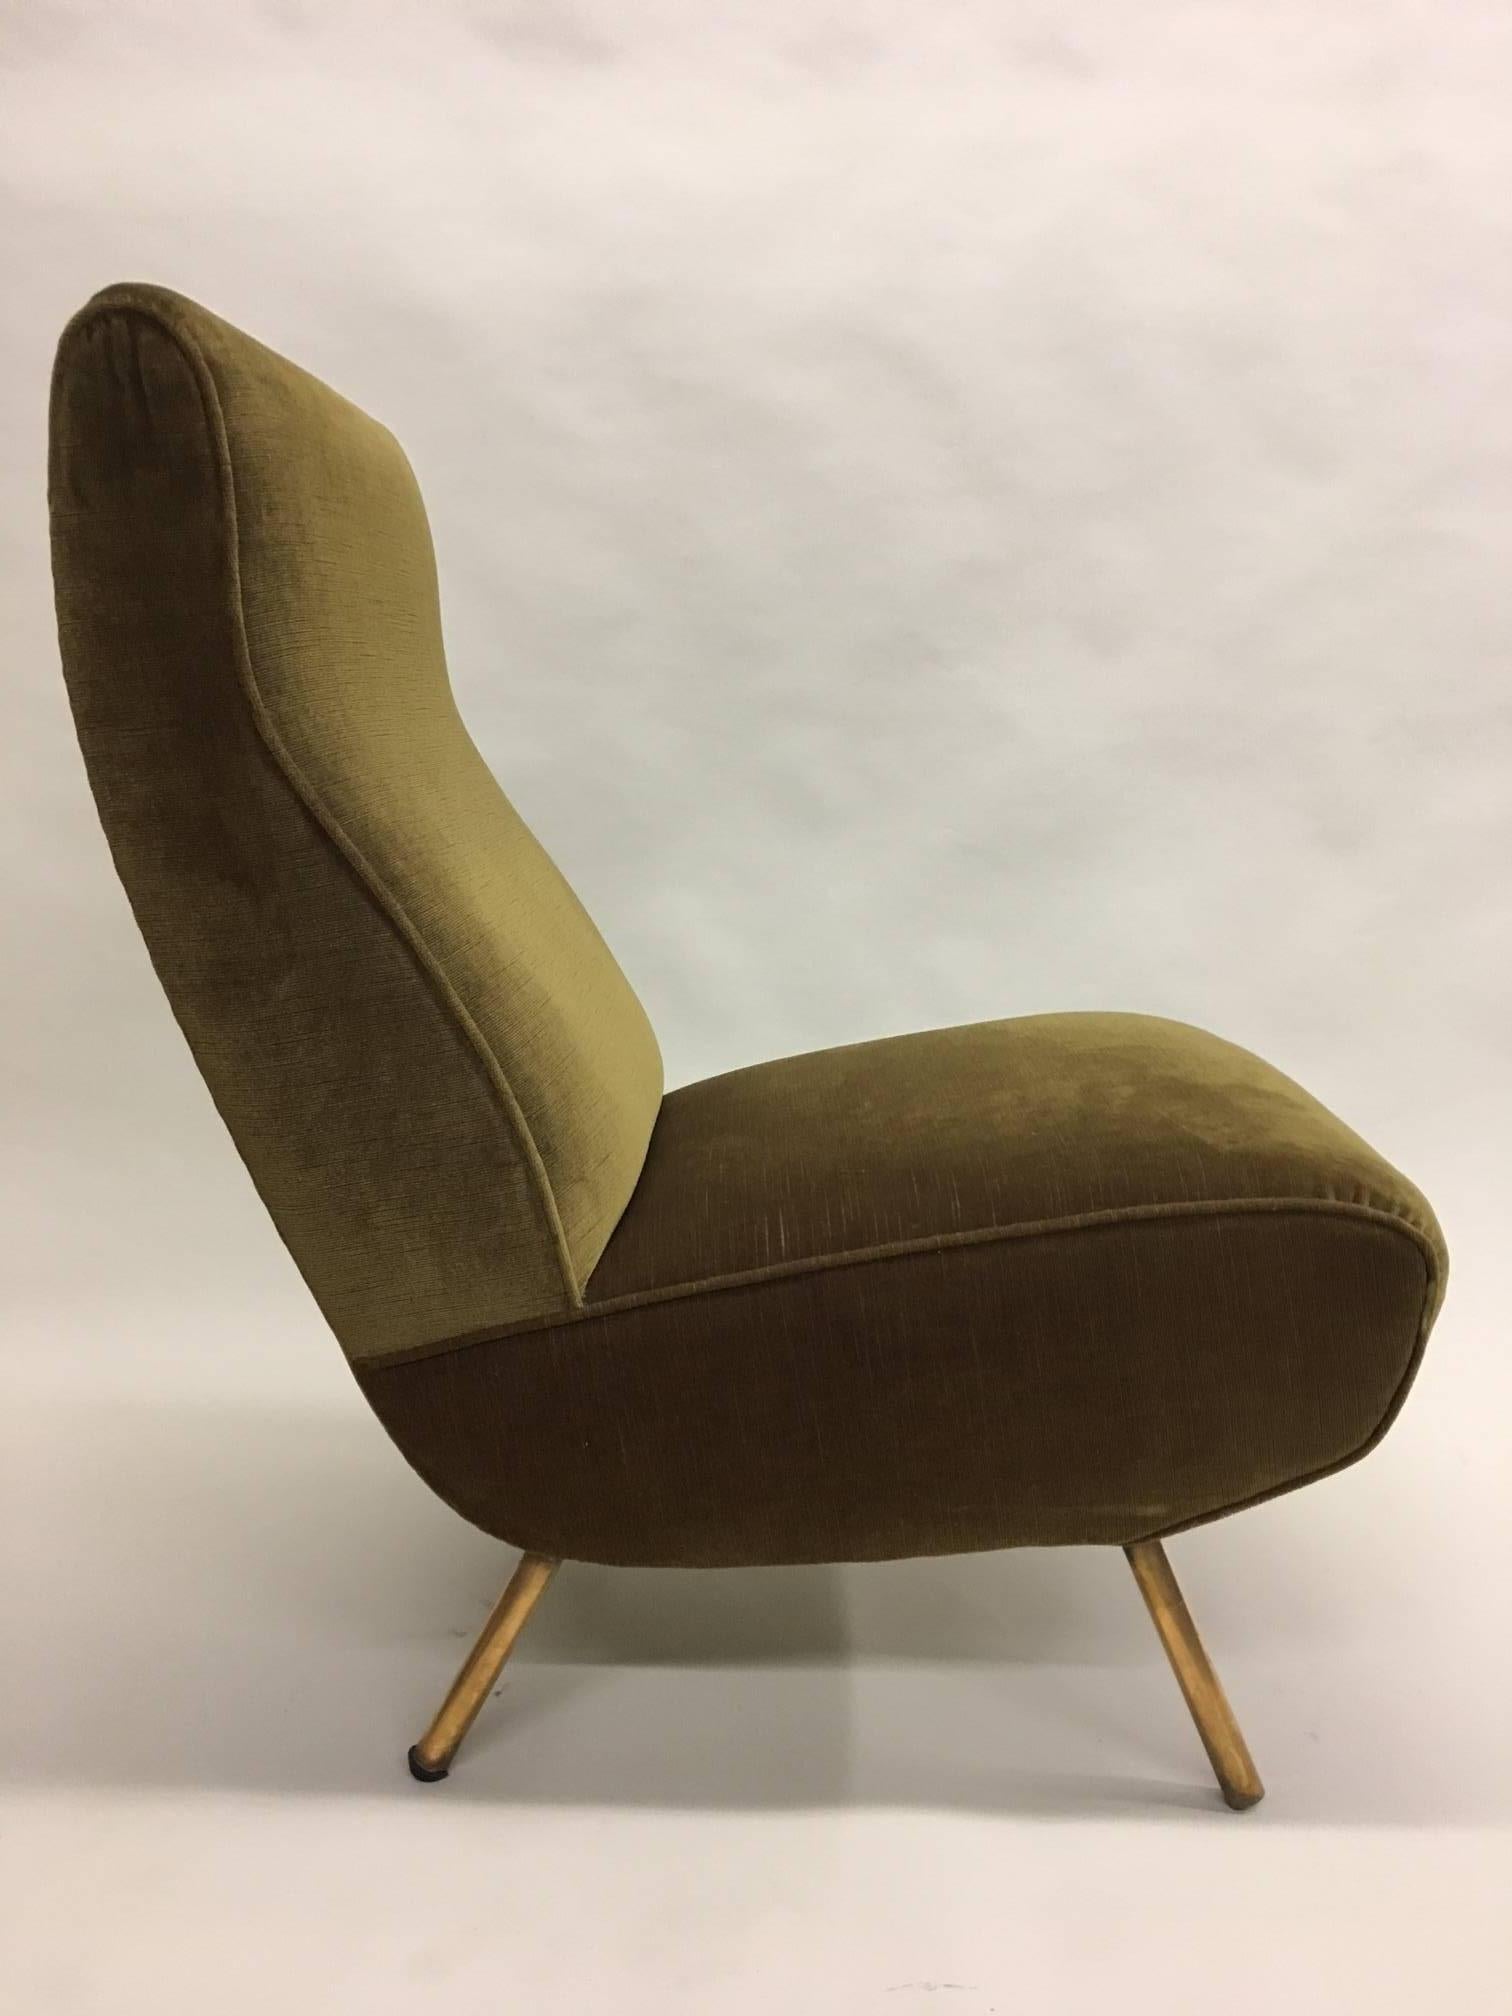 Rare Pair of Mid-Century Modern Triennale Lounge Chairs, Marco Zanuso Italy 1951 In Good Condition For Sale In New York, NY